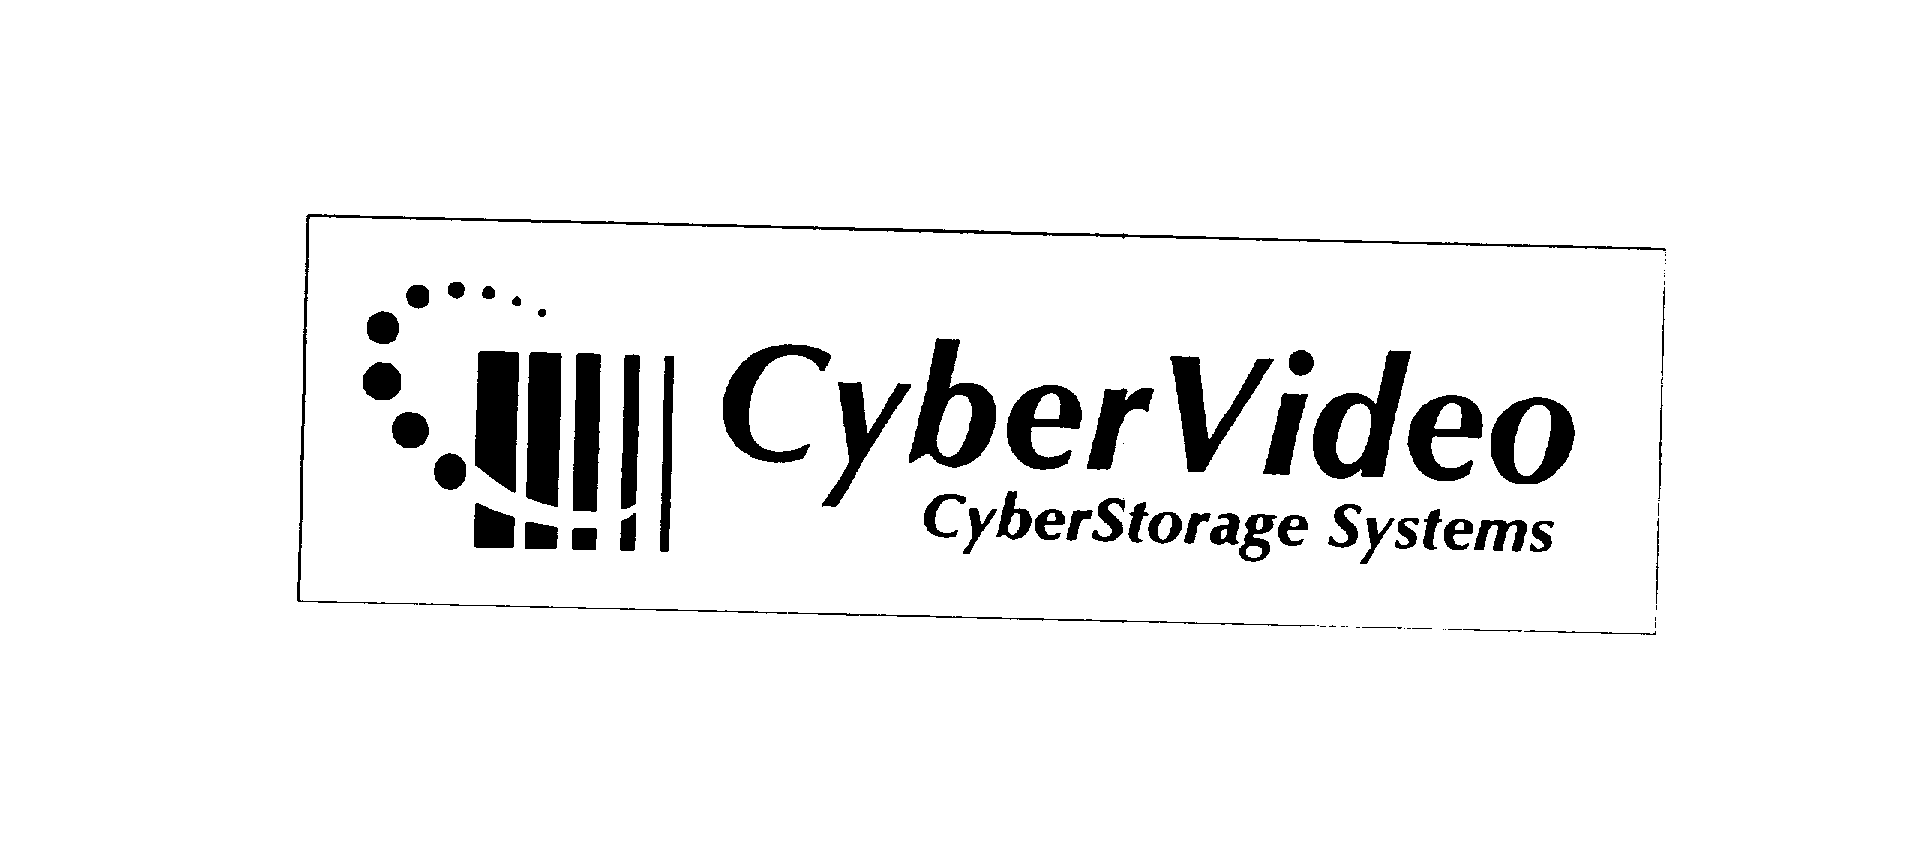 CYBERVIDEO